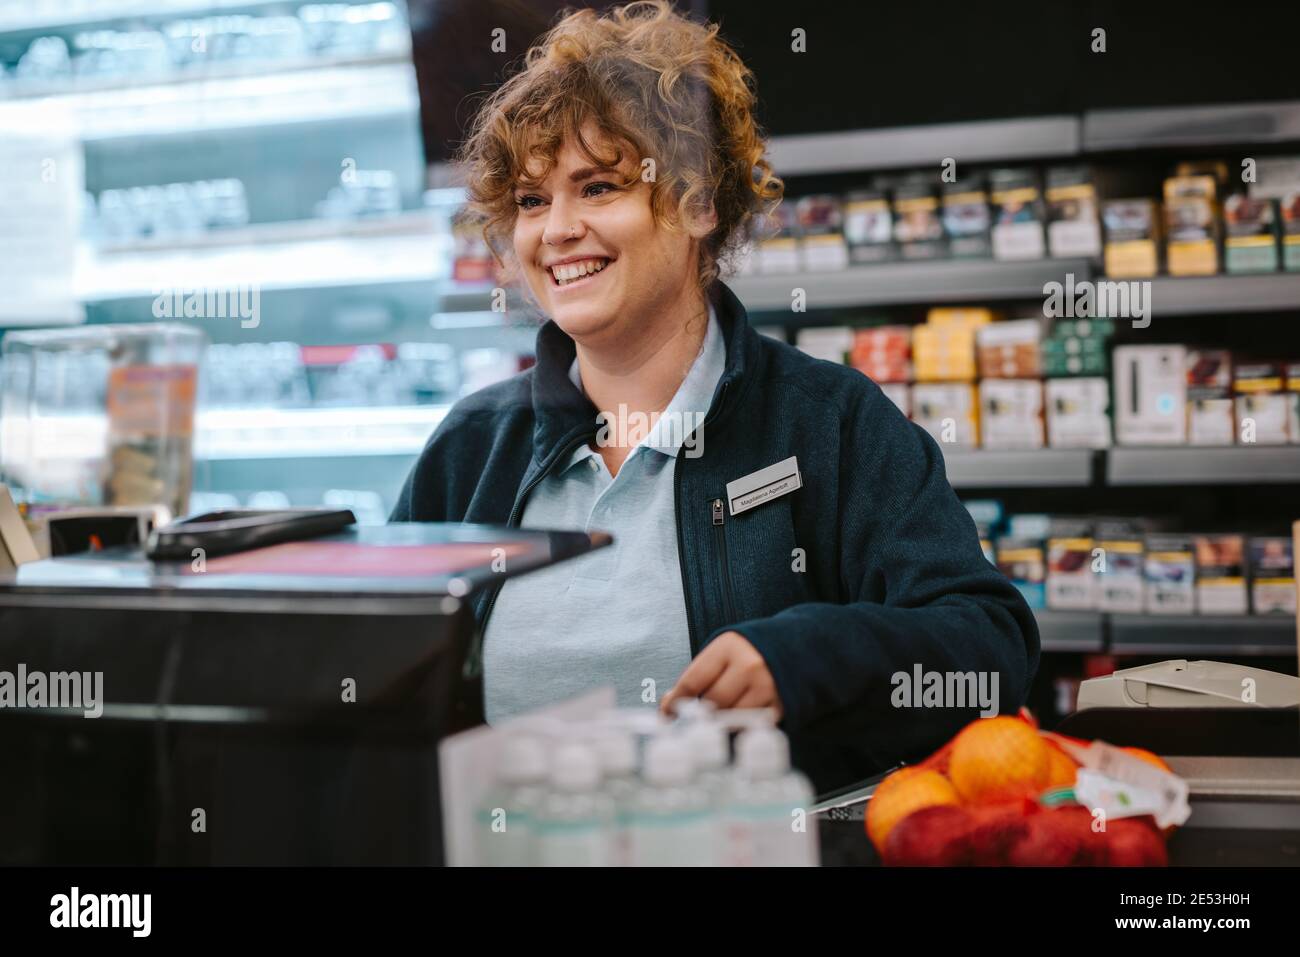 Woman working as a cashier in a supermarket. She is smiling at the customer. Stock Photo